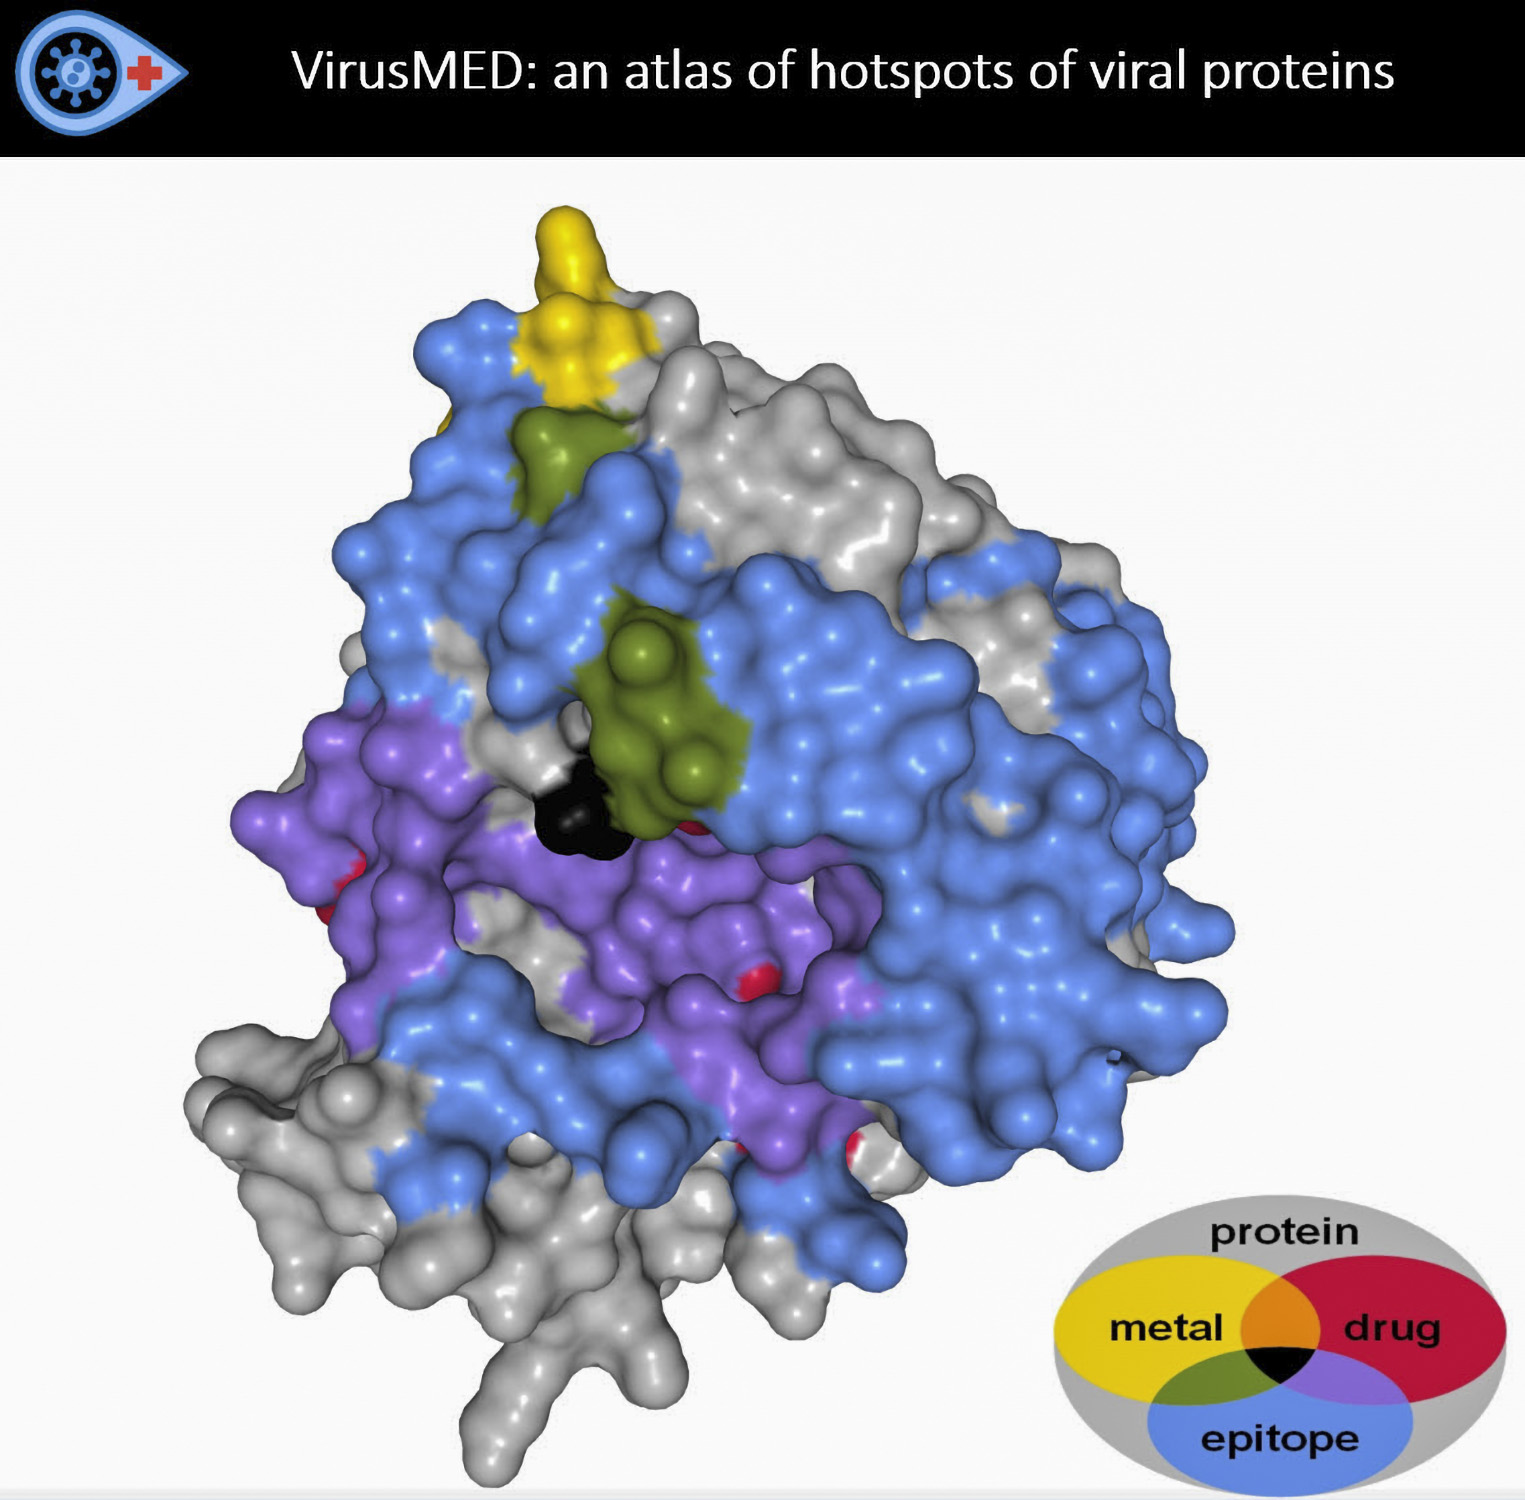 Virus with multiple colors (grey, blue, purple, yellow, green, black, and red) to show hotspots of different virus proteins